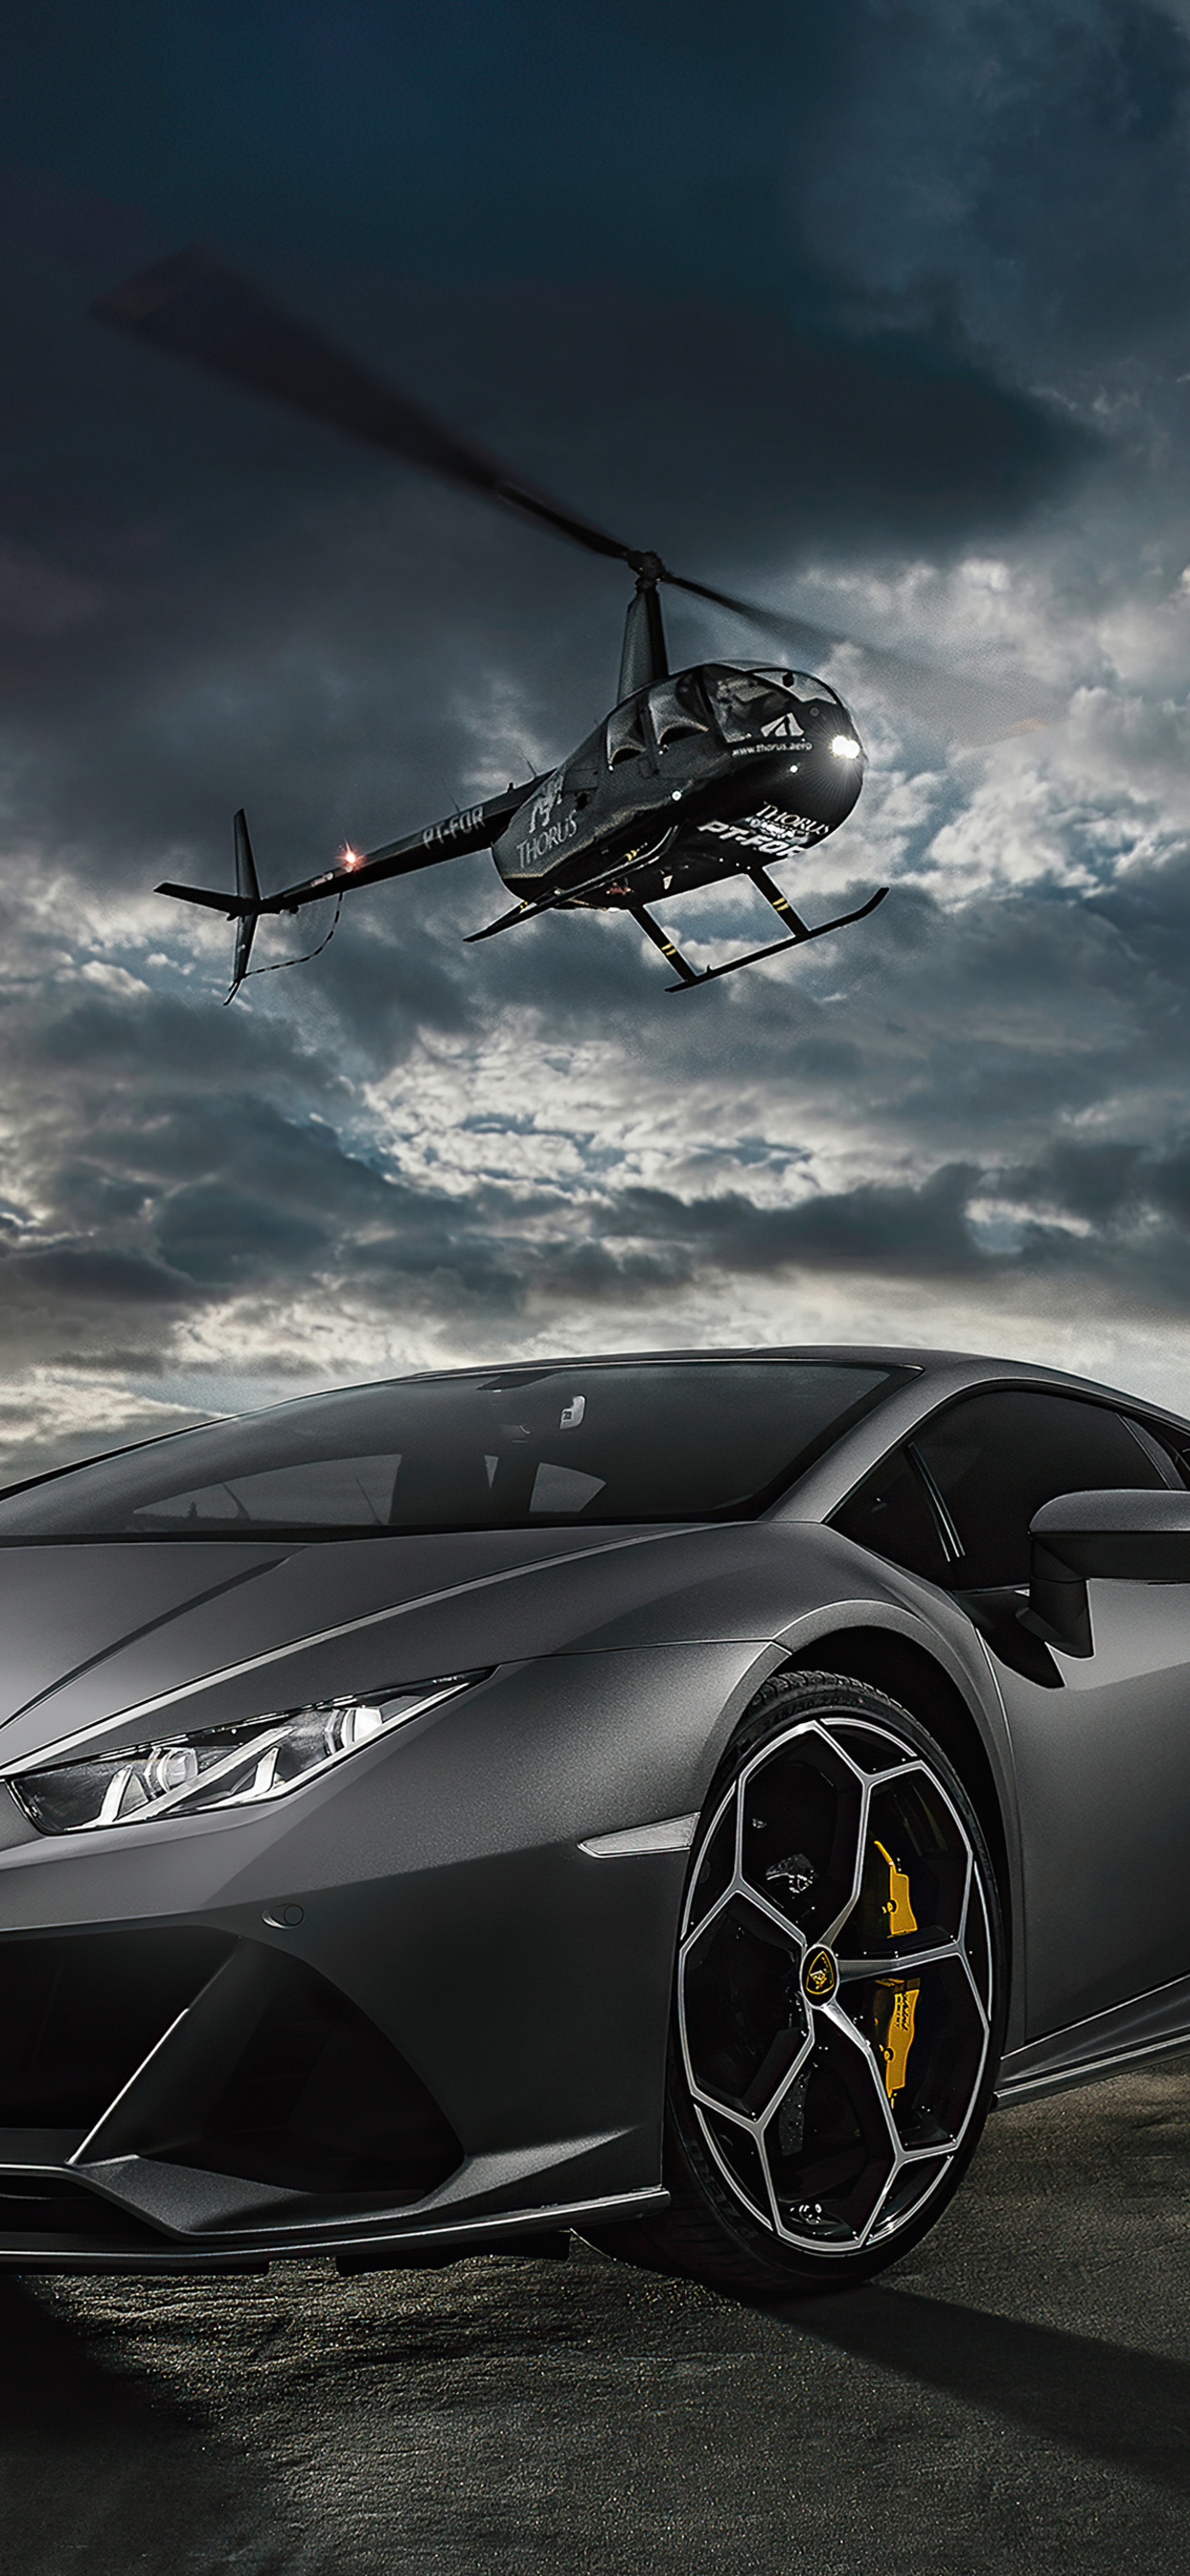 Lamborghini Huracan Evo, Helicopter aerial views, High-quality wallpapers, Luxury and speed, 1250x2690 HD Handy